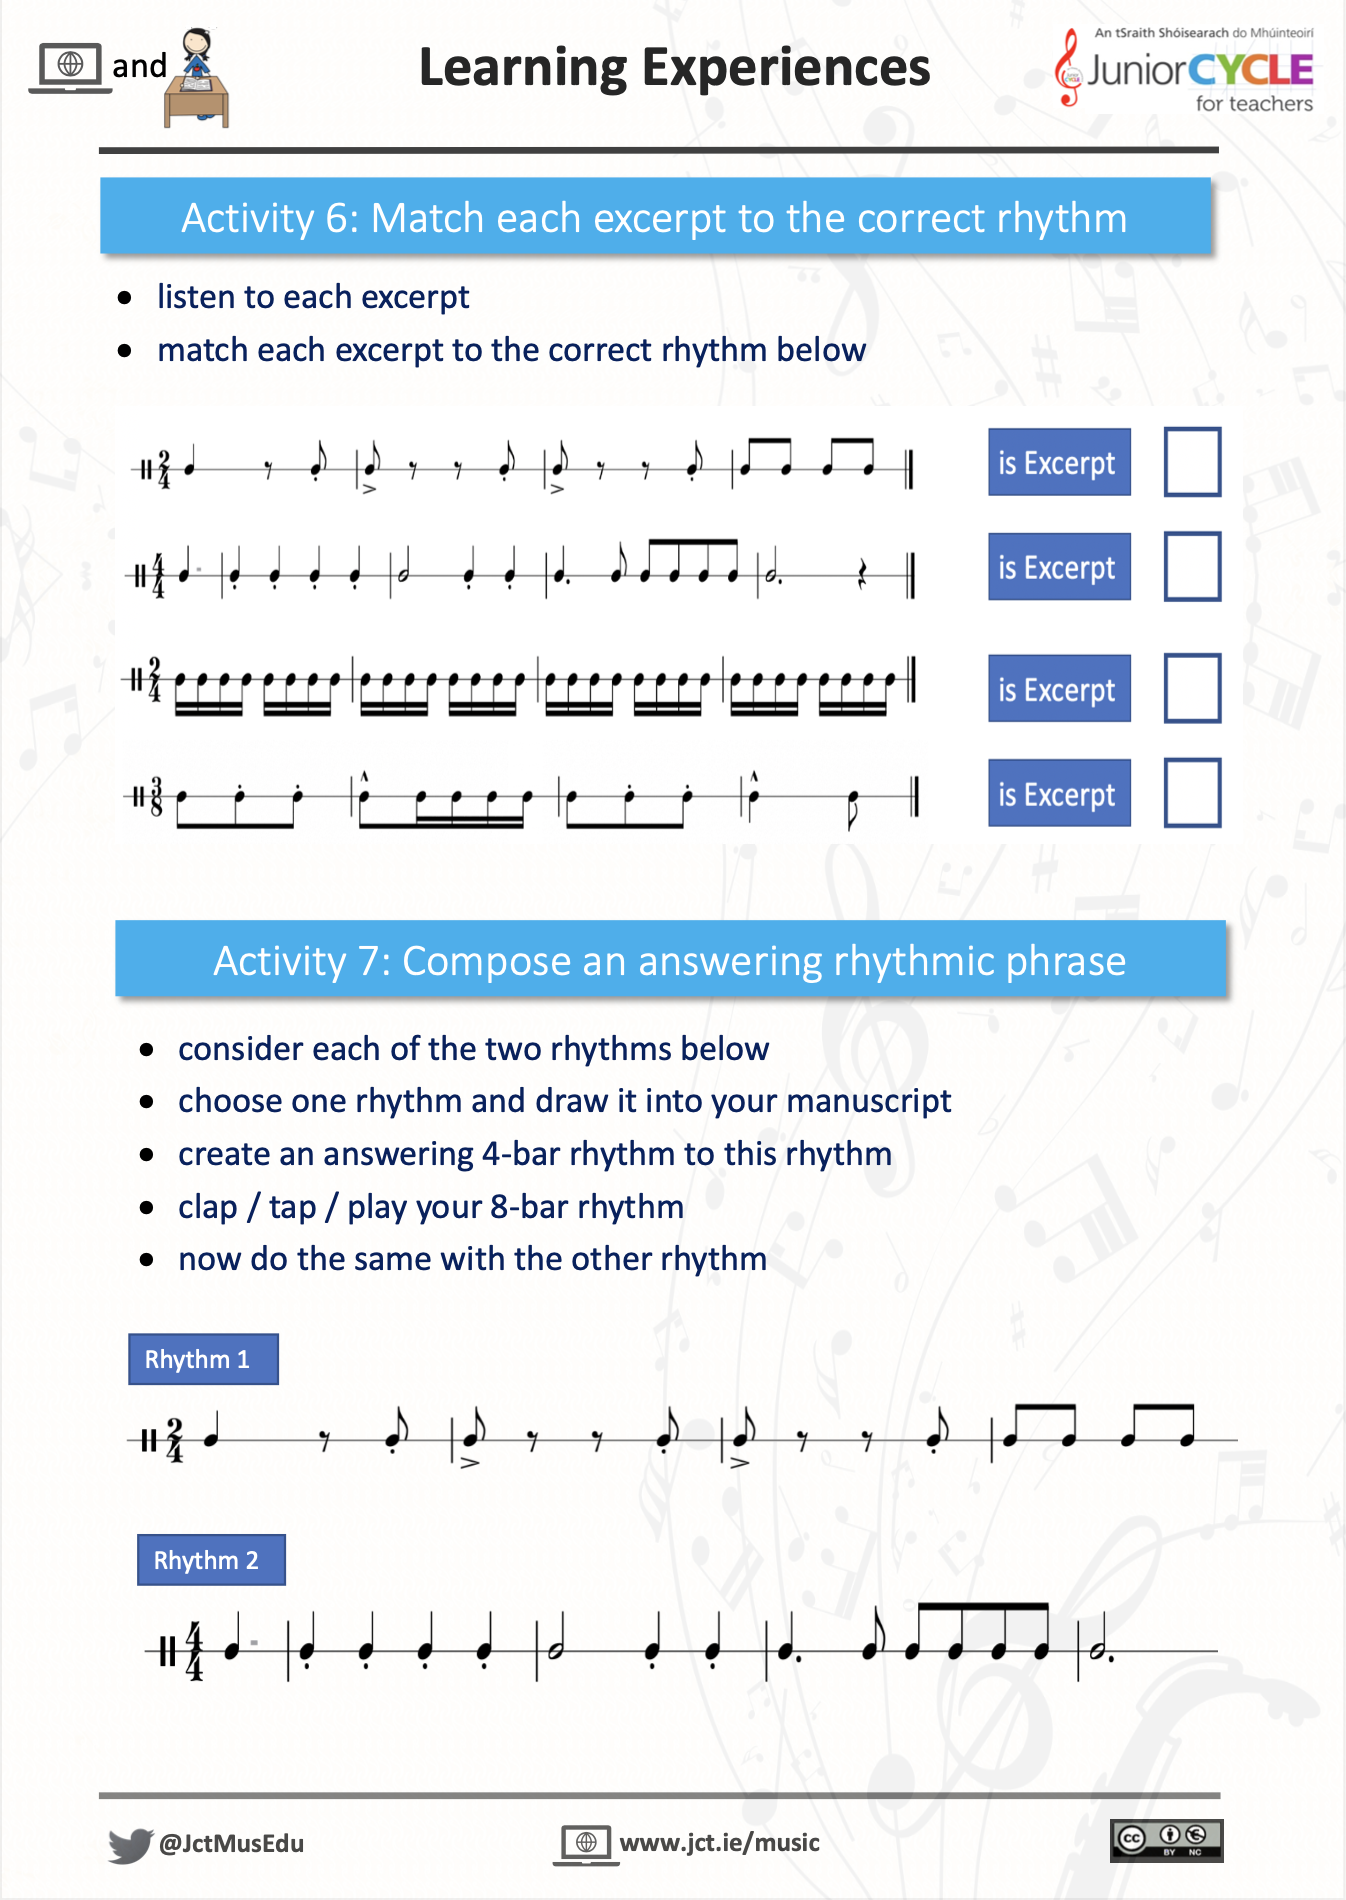 Online Learning Creating Music - Activity 6 & 7 PDF